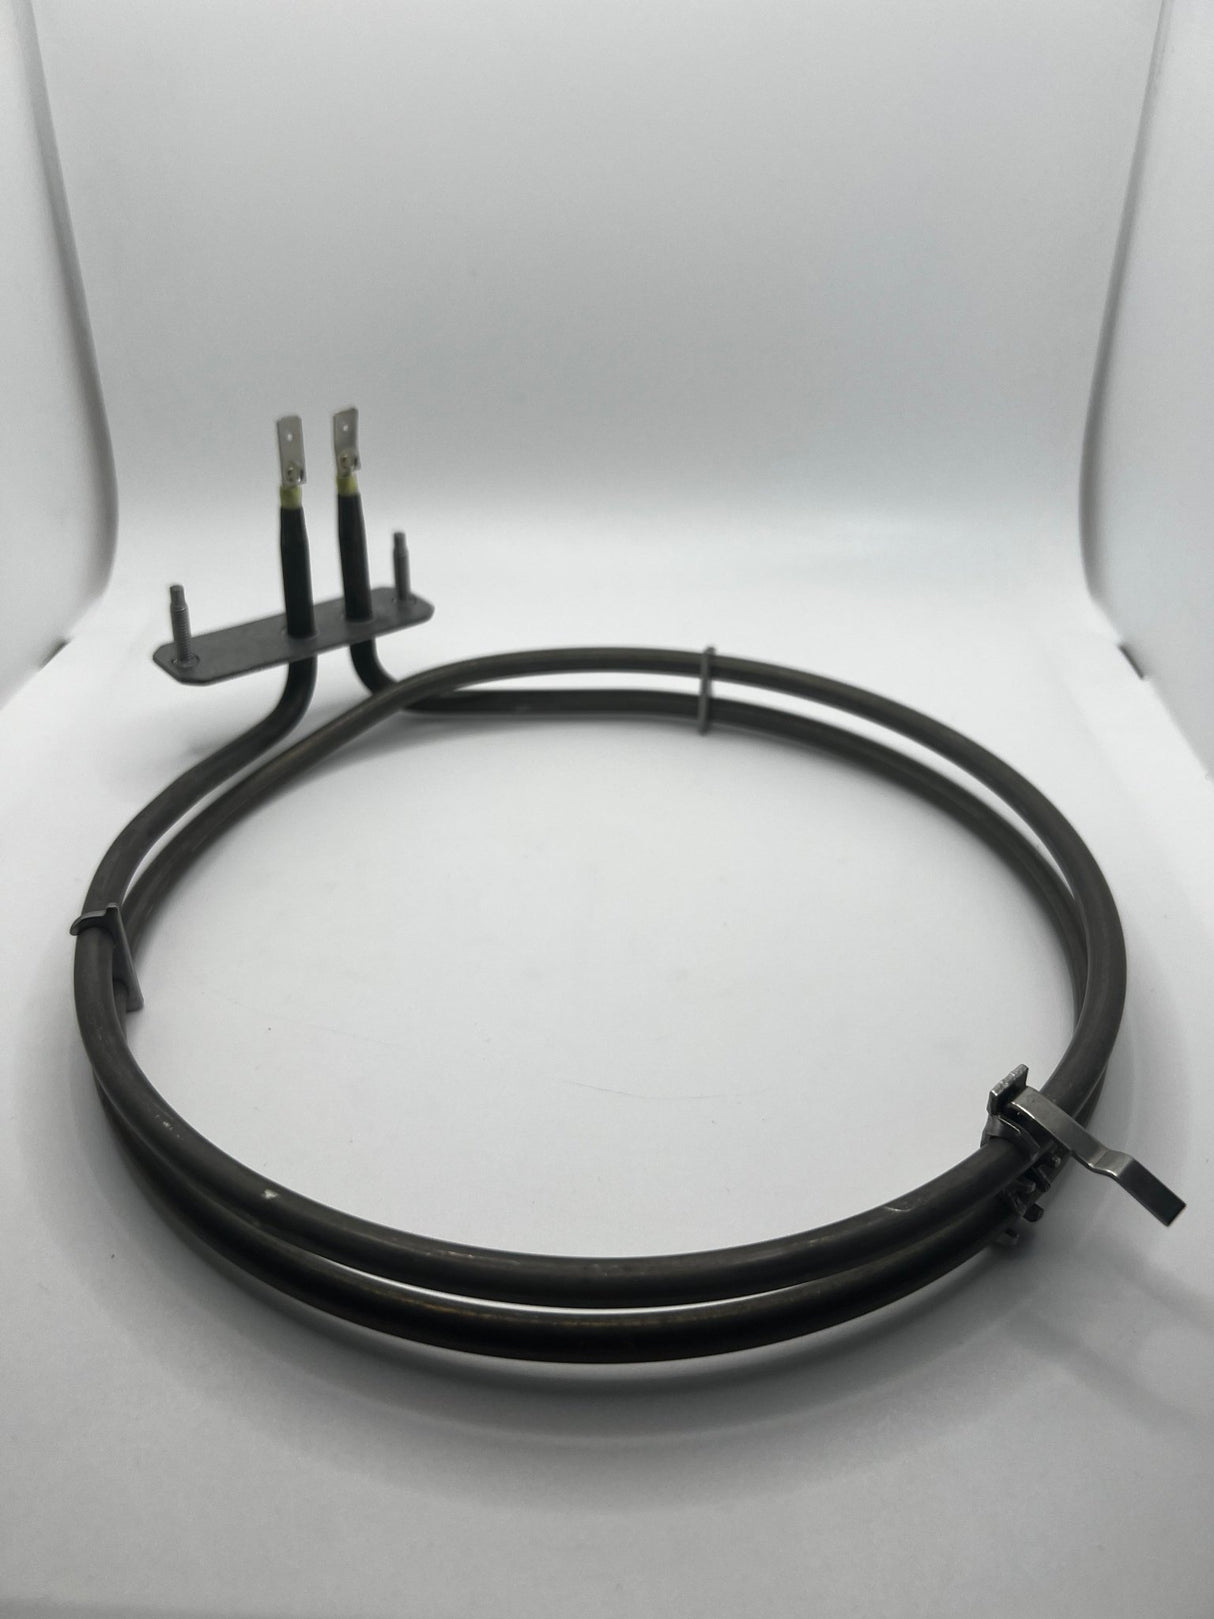 Asko Fan Forced Oven Element 2100W 437928 - My Oven Spares-Asko-437928-3